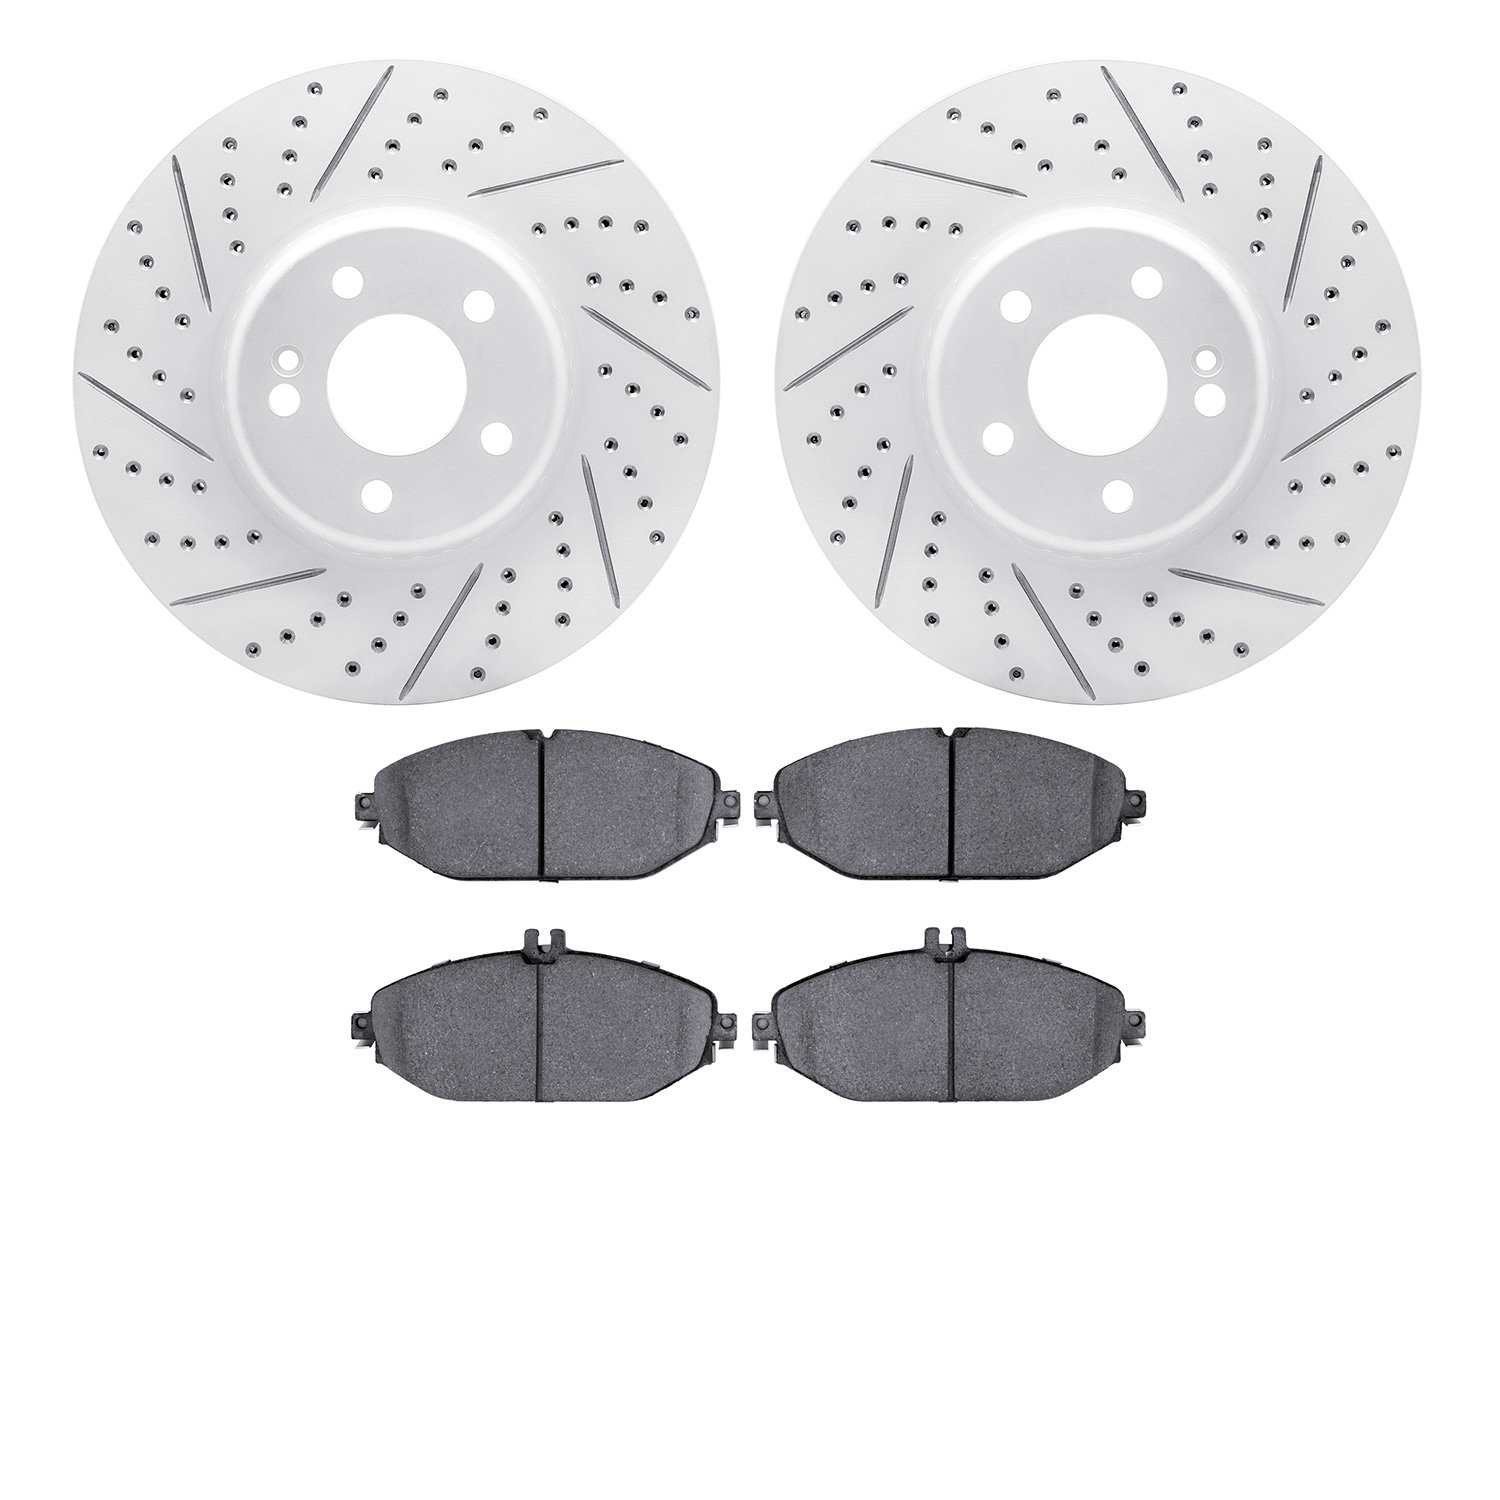 2502-63046 Geoperformance Drilled/Slotted Rotors w/5000 Advanced Brake Pads Kit, Fits Select Mercedes-Benz, Position: Front